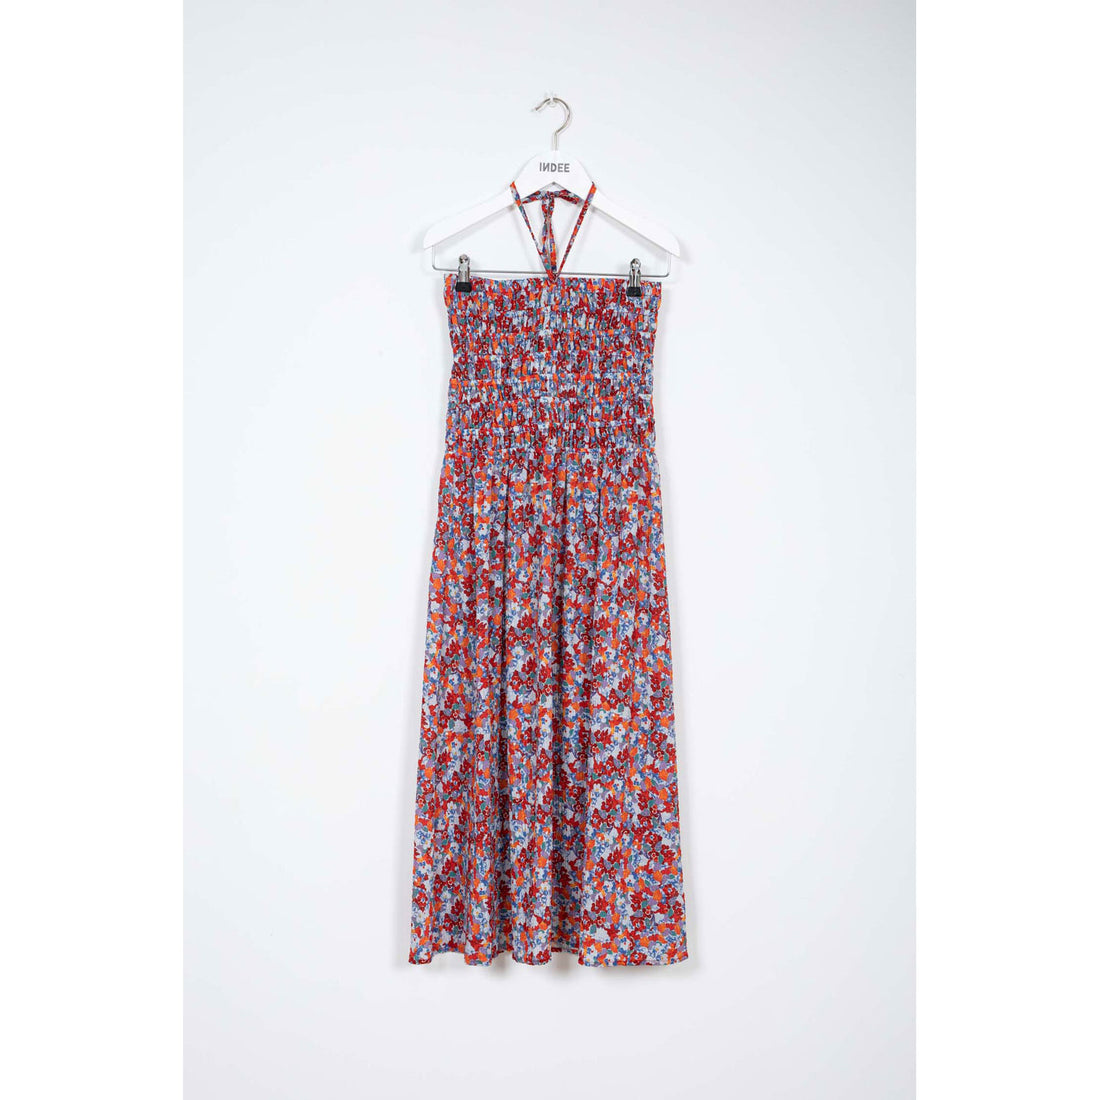 Indee Tropical Blue Printed Long Skirt